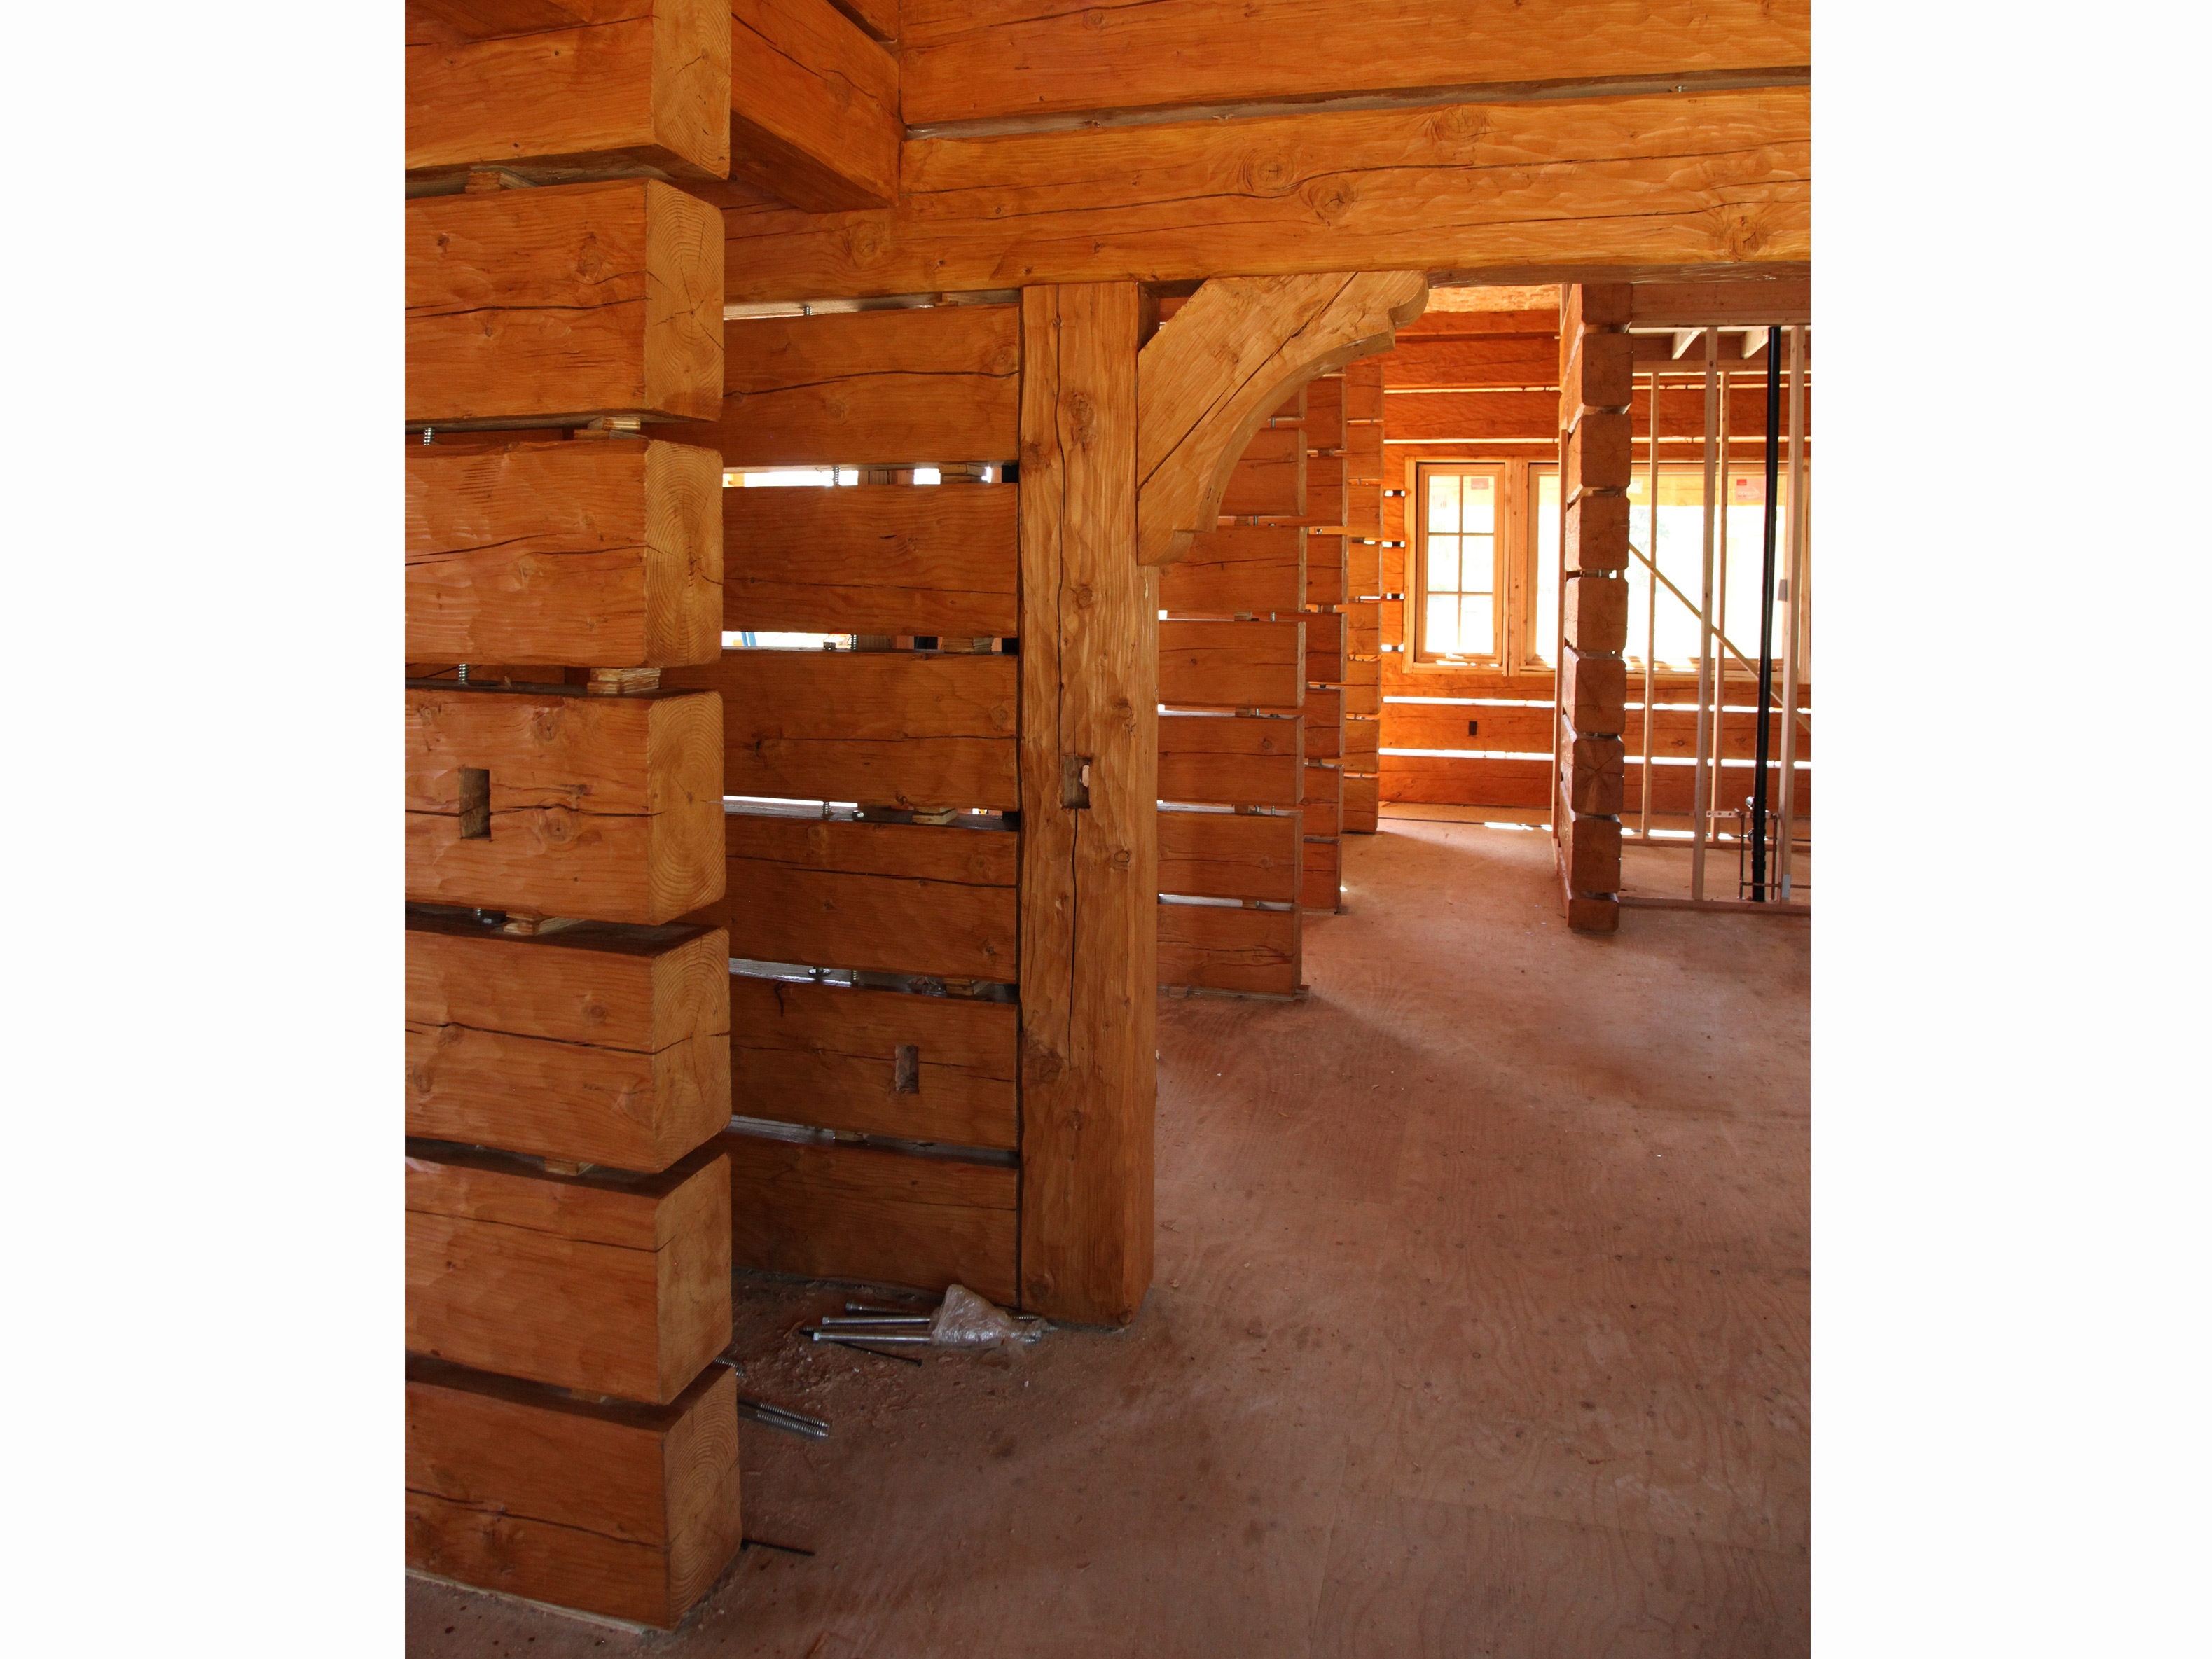 stained log cabin interior